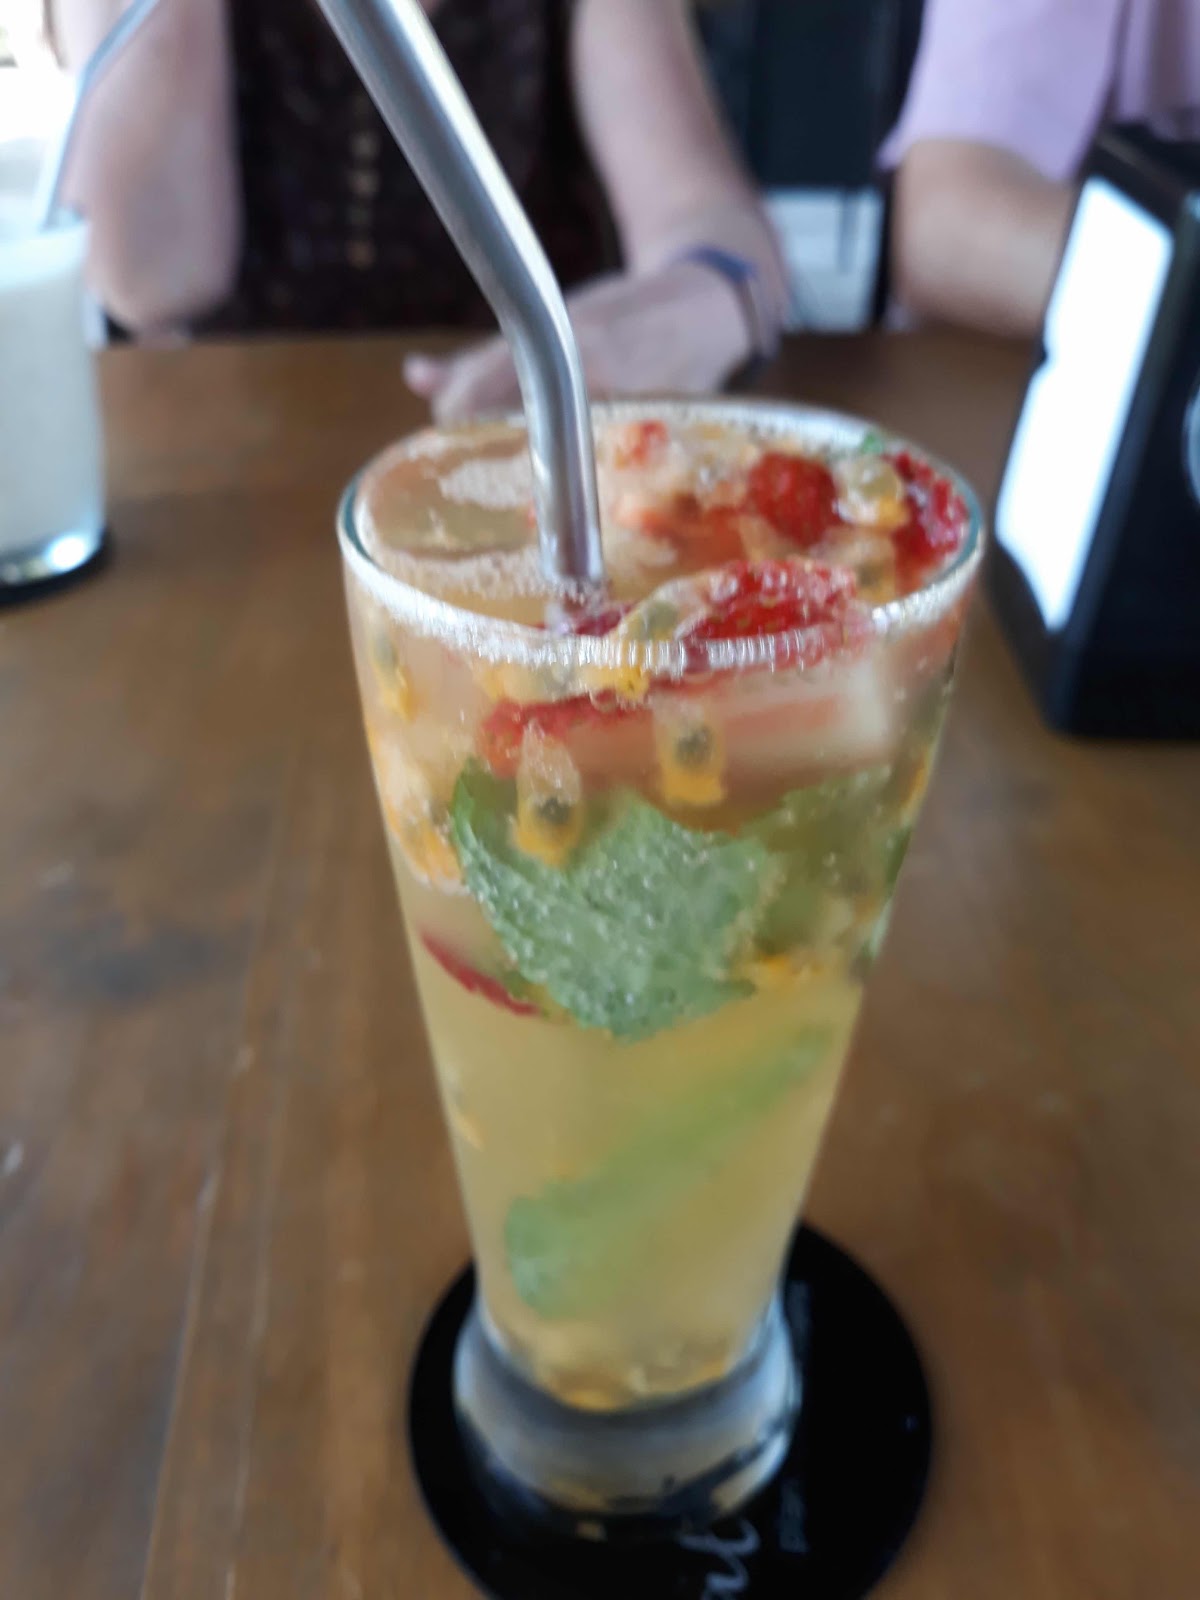 My drink - mojito - loaded with fruit.